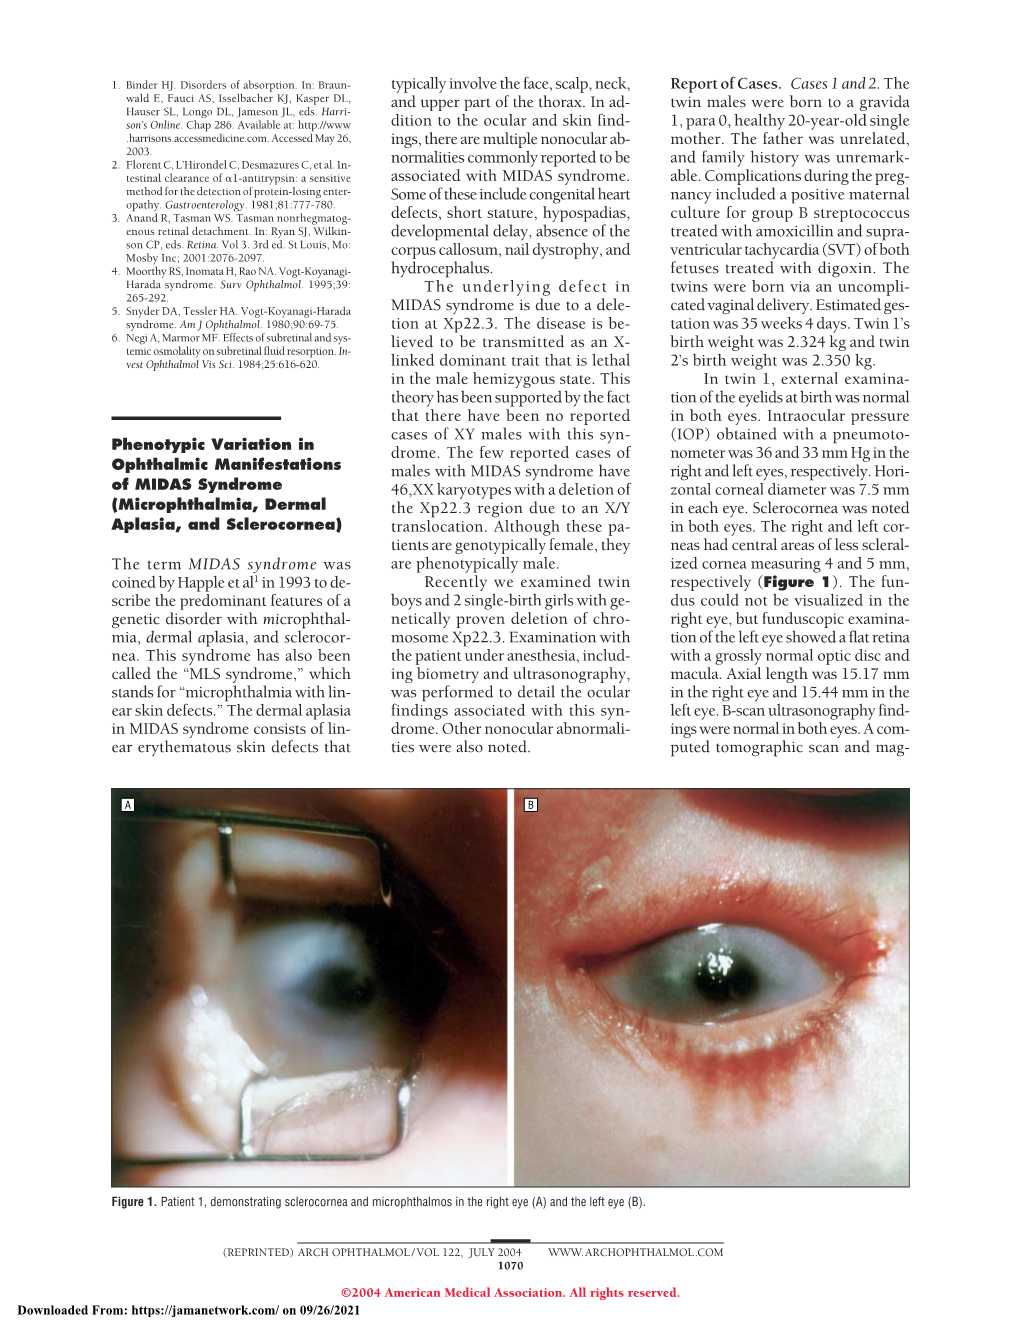 Phenotypic Variation in Ophthalmic Manifestations of MIDAS Syndrome